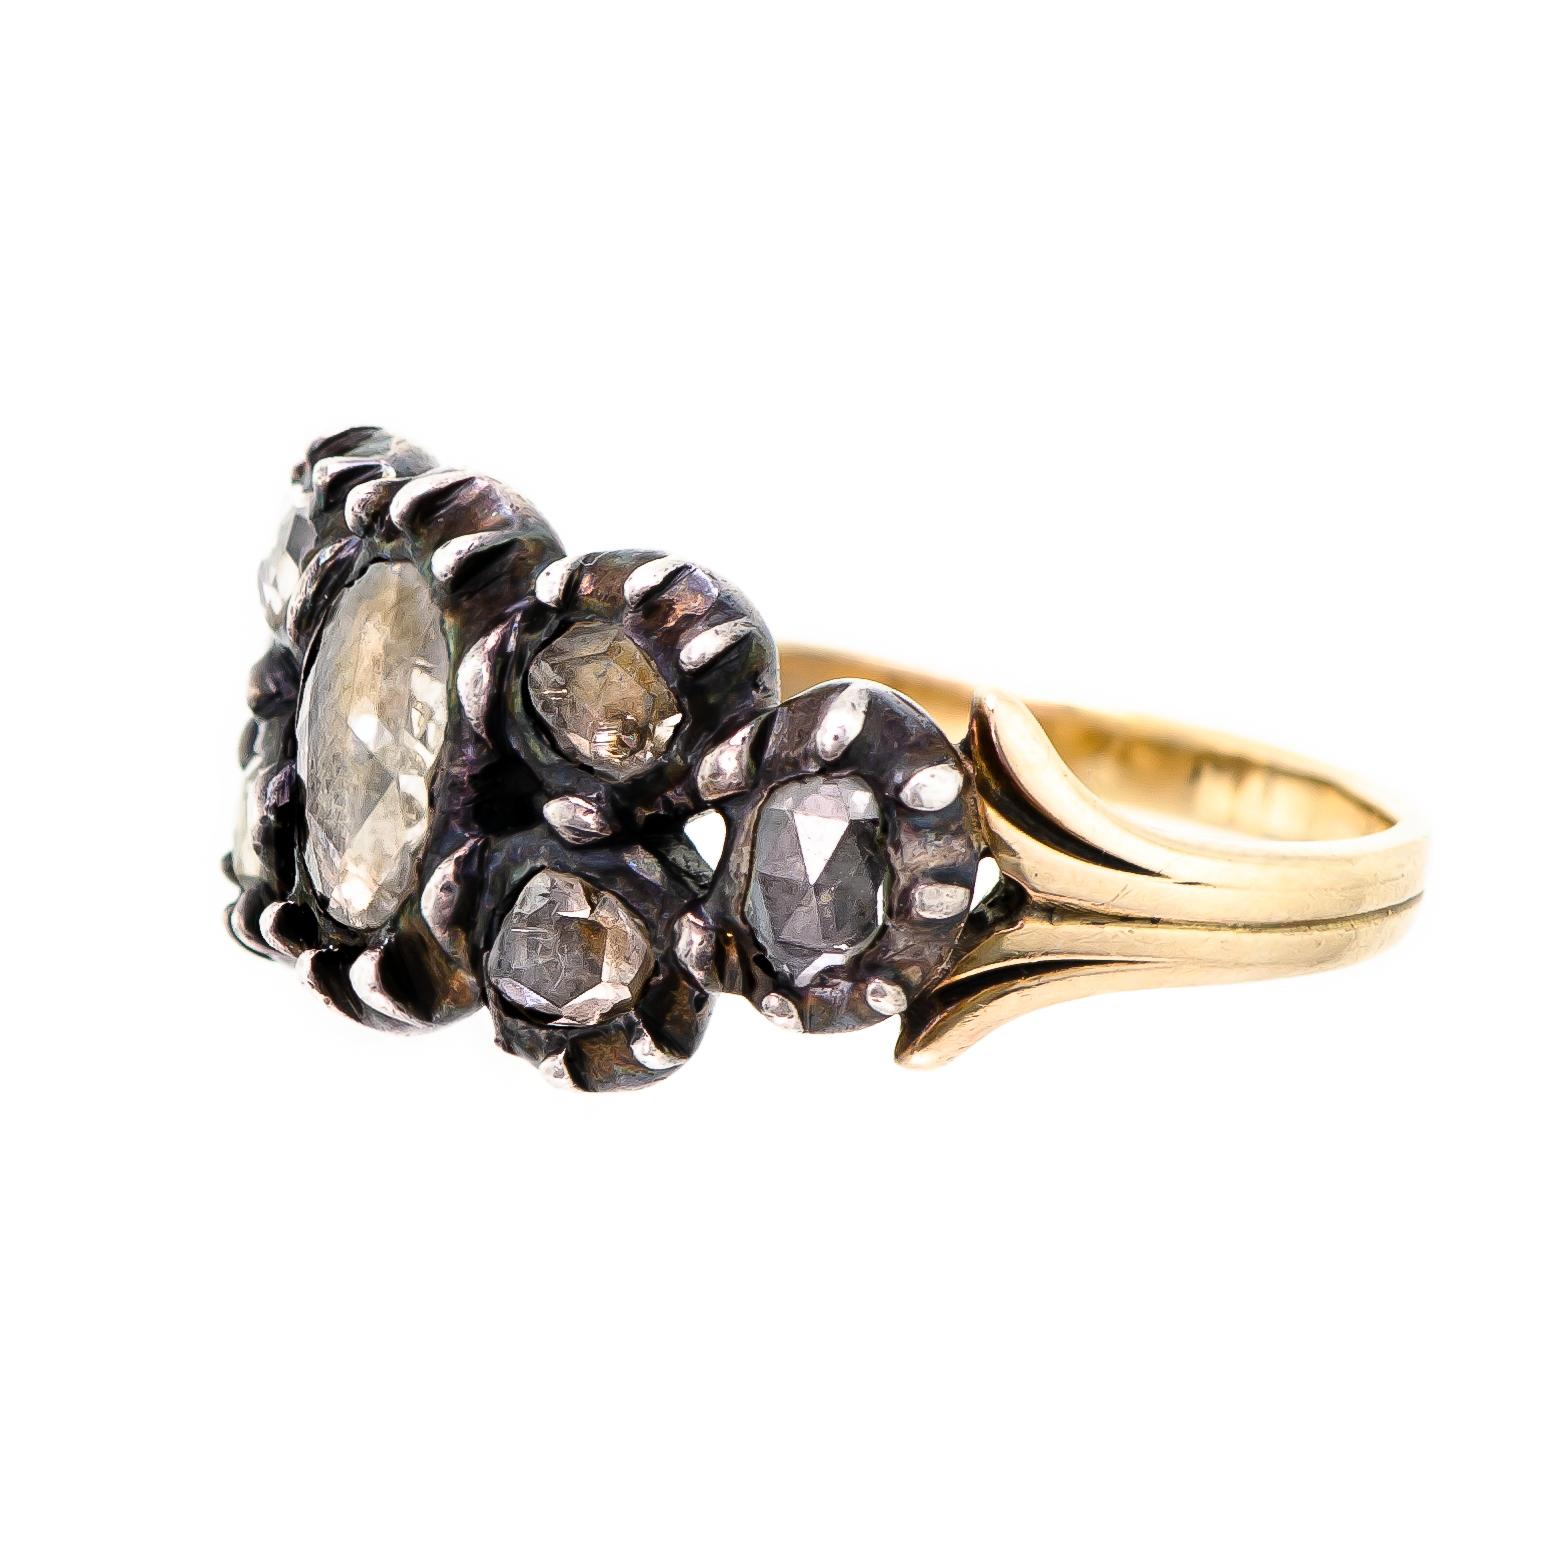 This alluring antique late Georgian early Victorian diamond ring is handcrafted in silver over yellow gold. Set with seven (7) crimped collet and prong closed-back majestic rose-cut diamonds of varying sizes. These beautiful diamonds are foil-backed